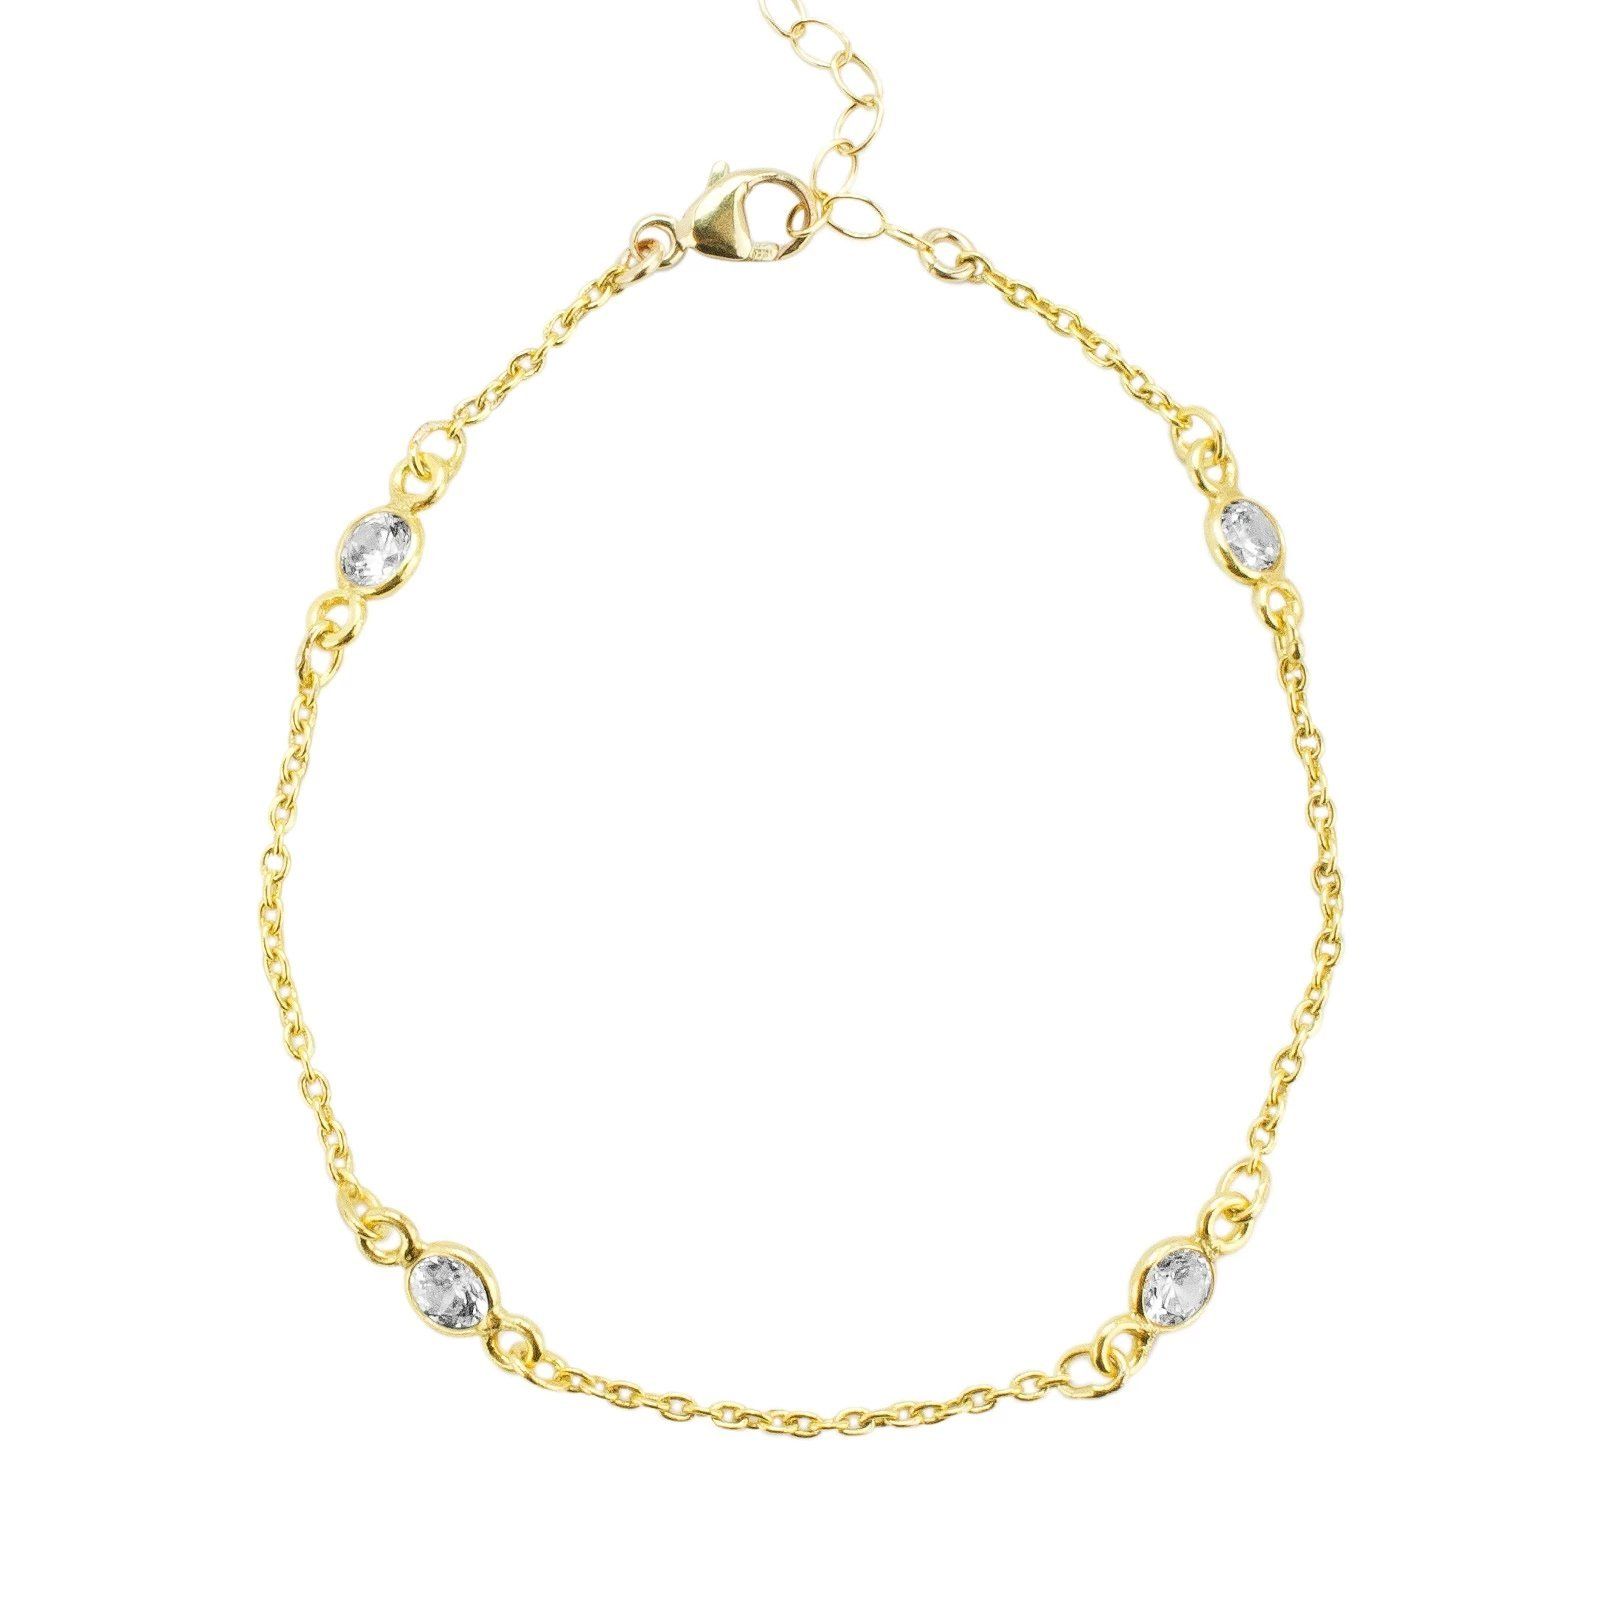 The Crystal Chain Bracelet is perfect for the woman who wants a classic sparkle layered in with their look. 